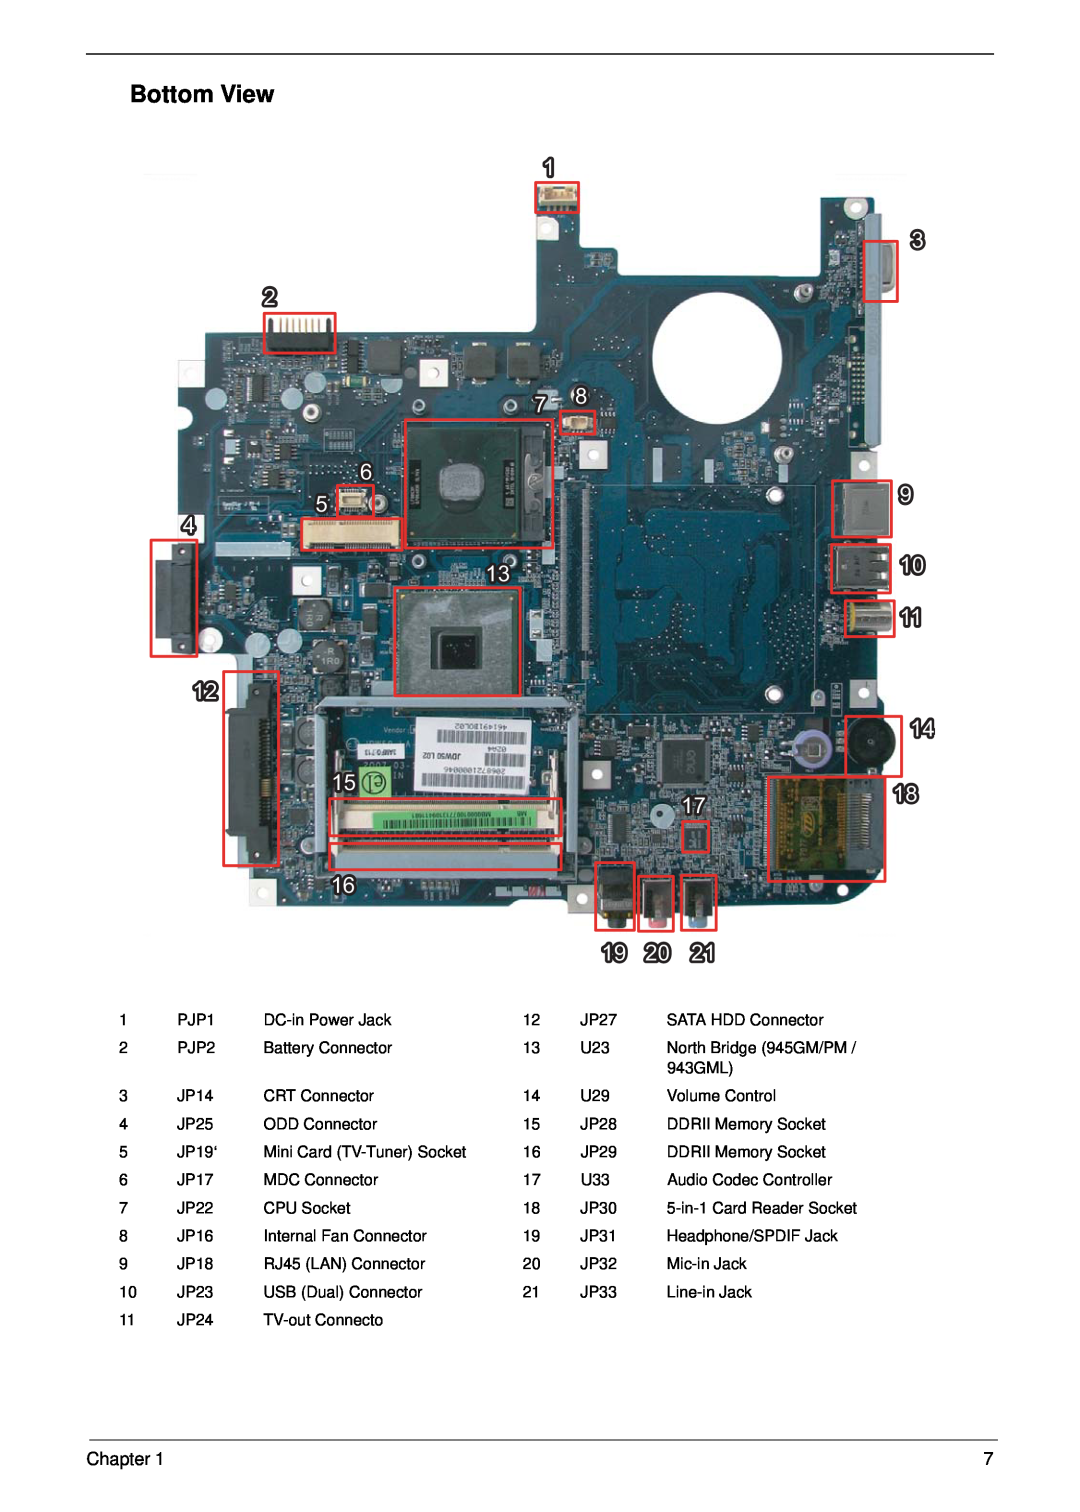 Acer 5710G, 5310G manual Bottom View, Chapter 